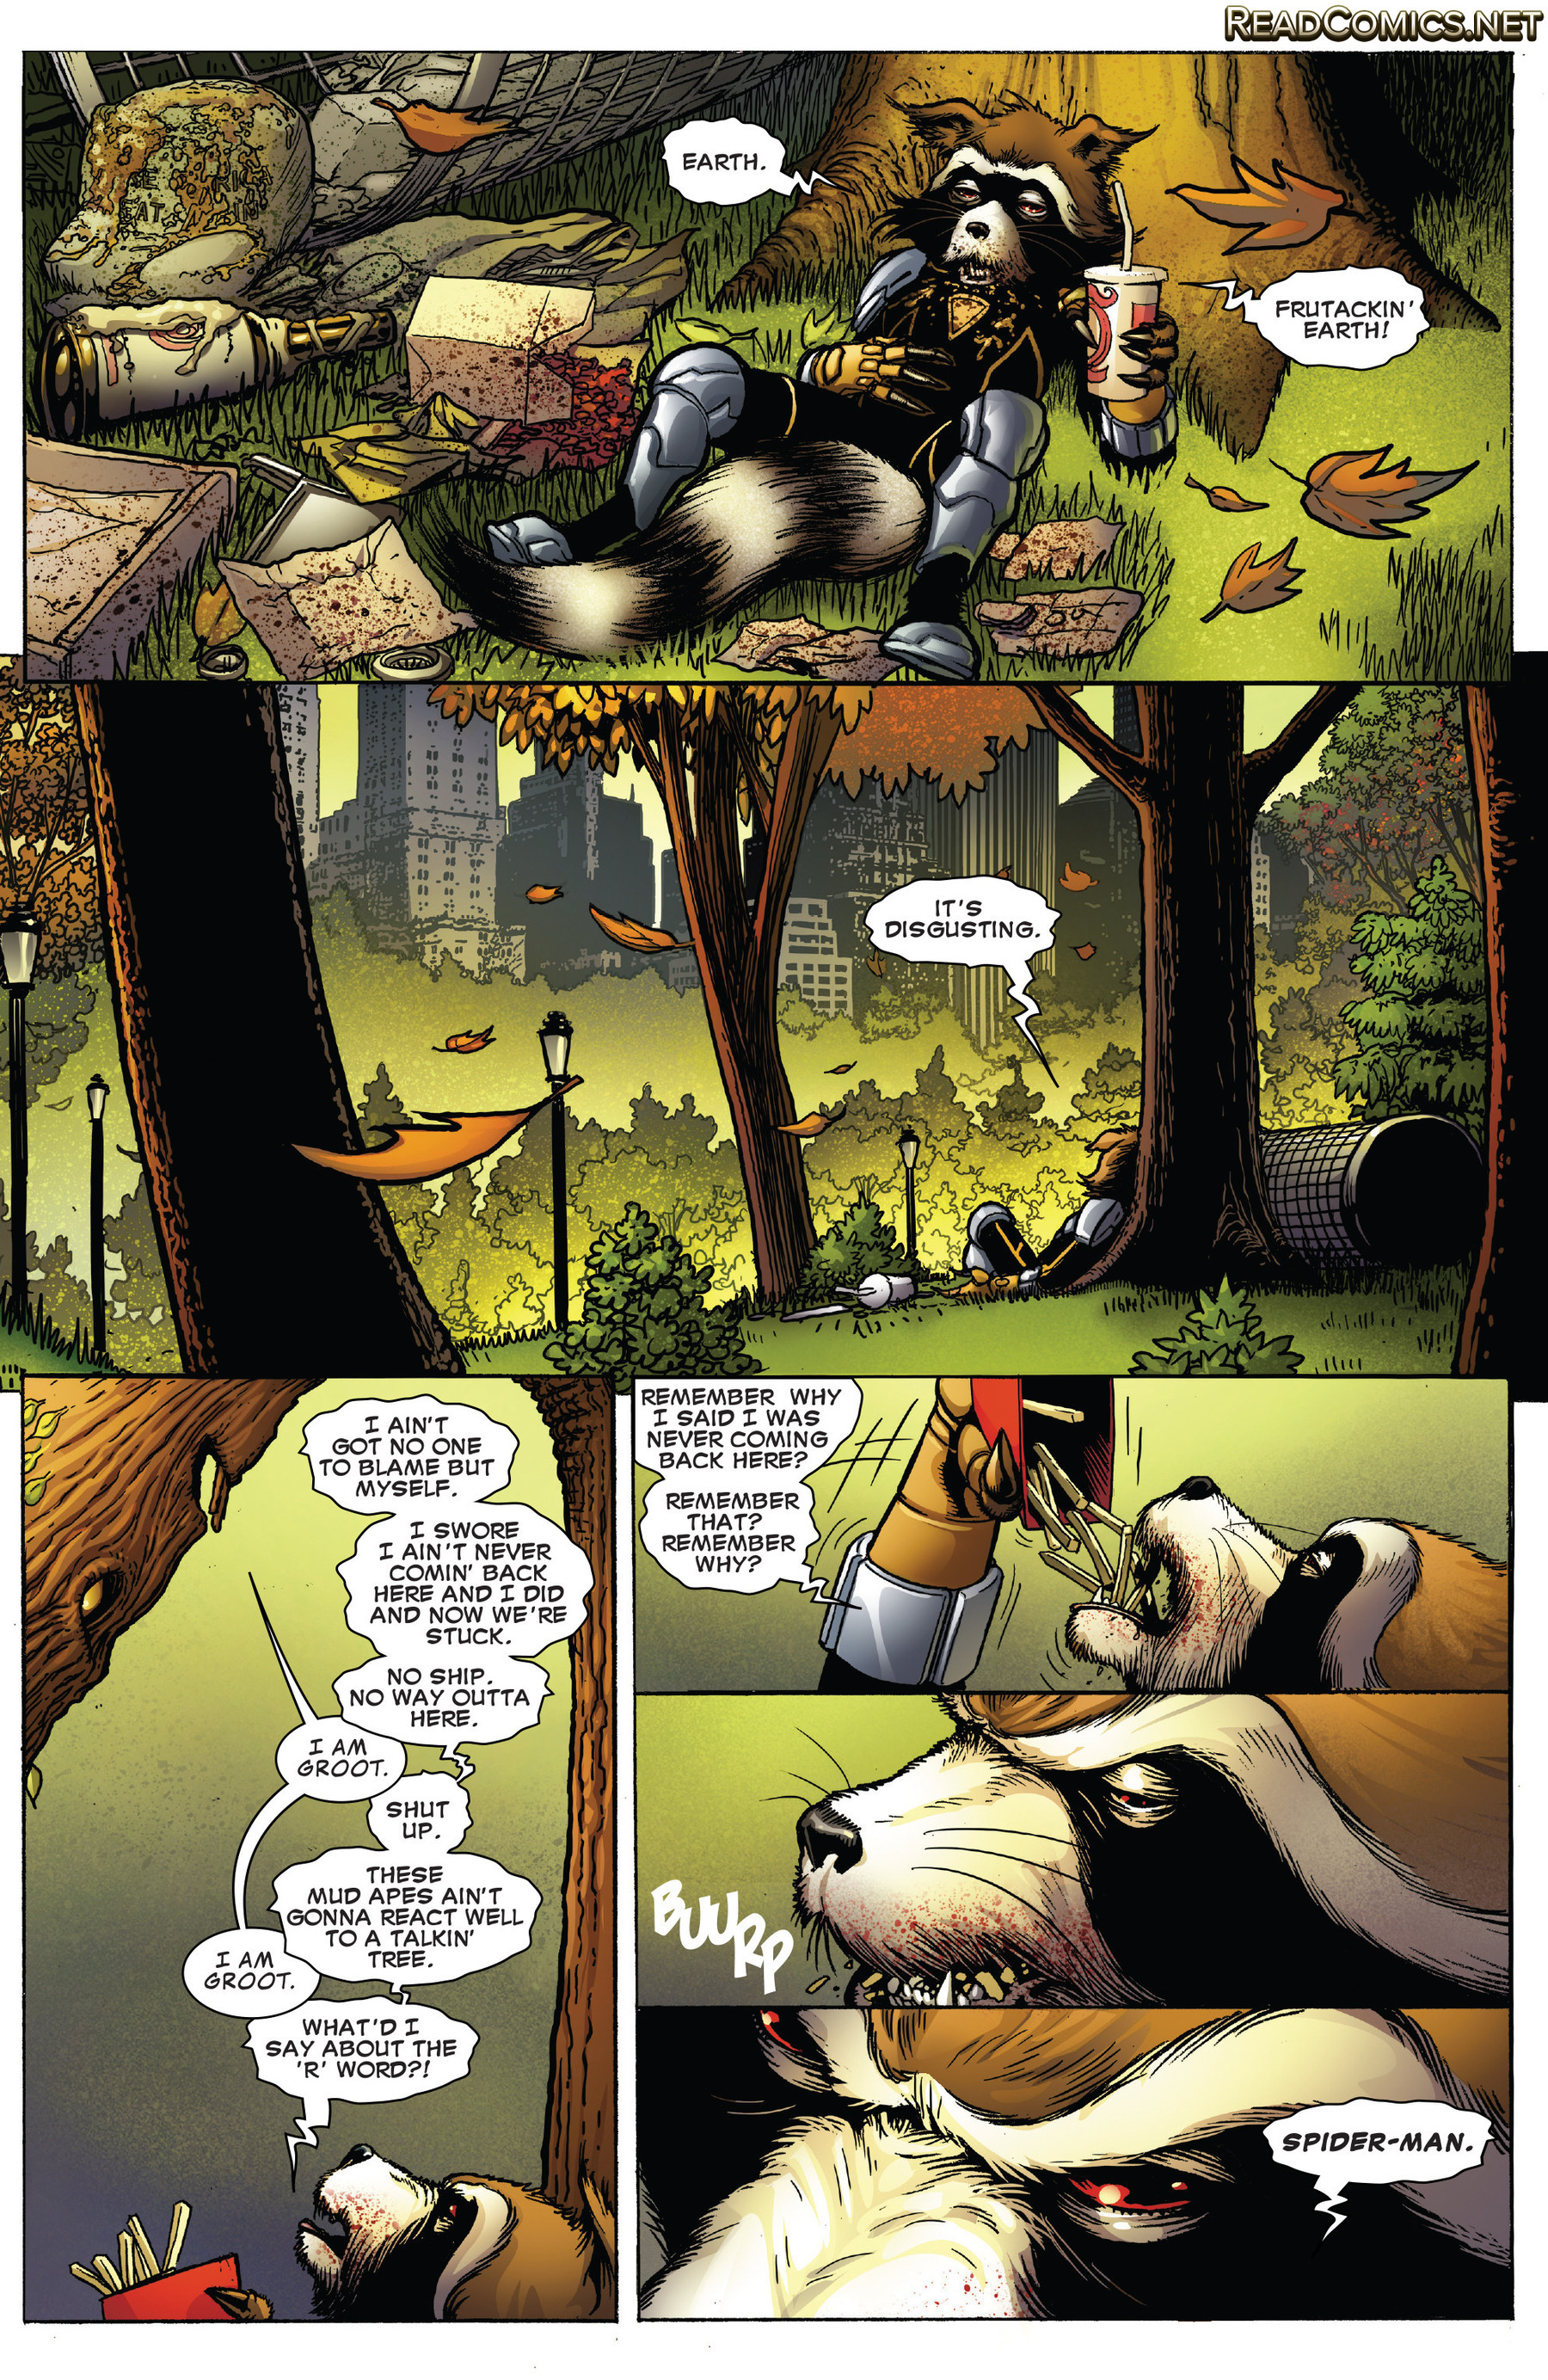 Guardians of the Galaxy (2015-): Chapter 14 - Page 3